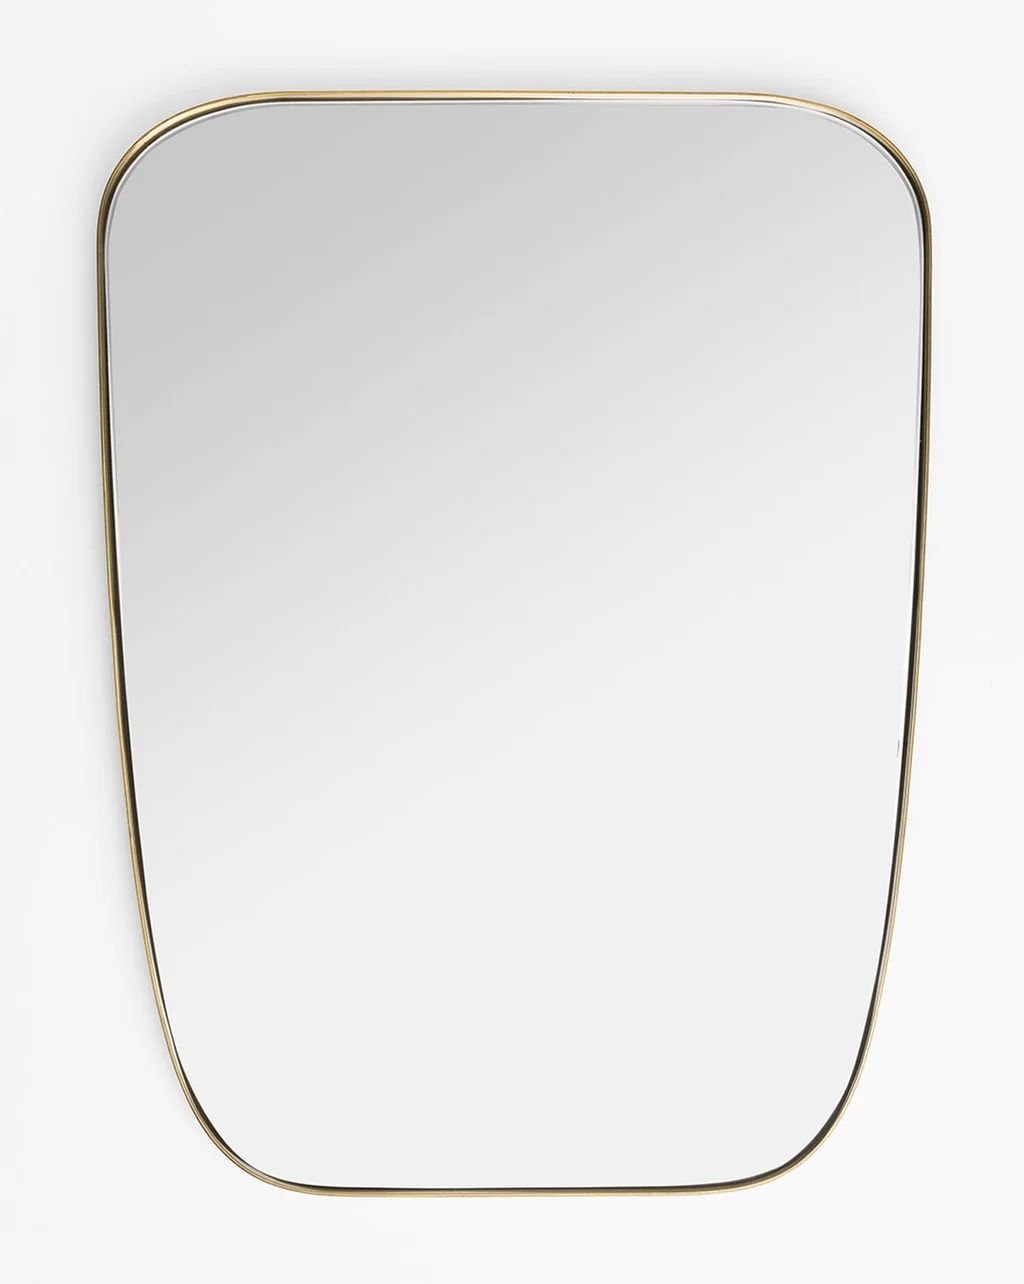 Jace Inset Mirror | McGee & Co.